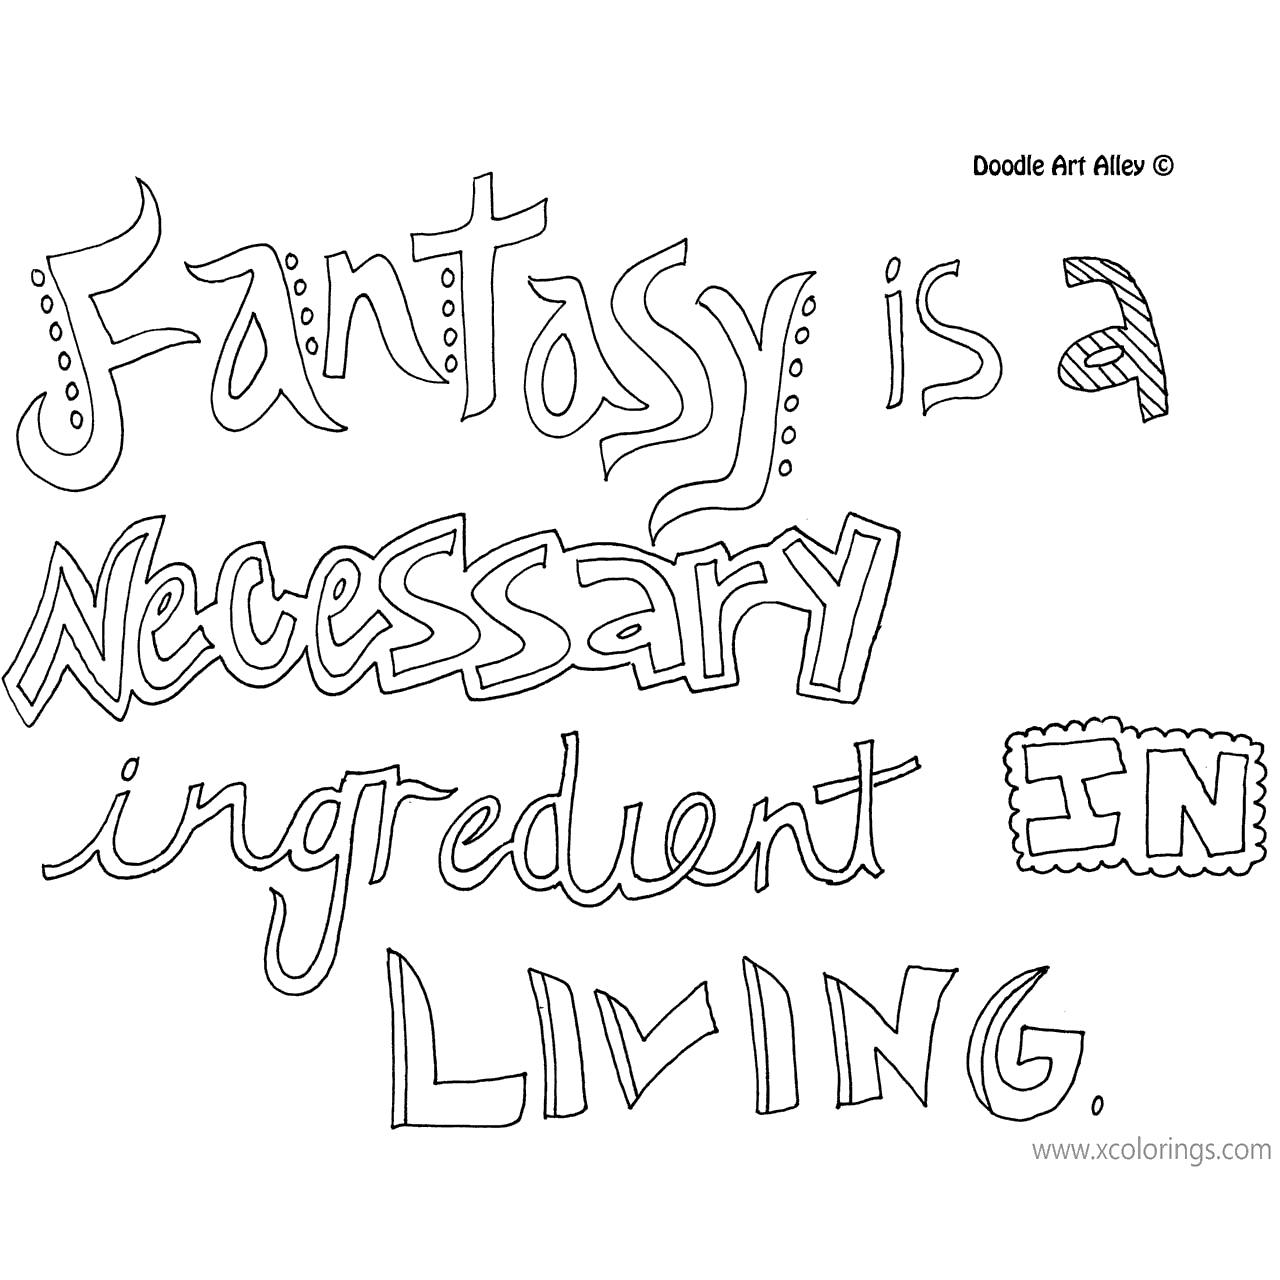 Free Dr Seuss Quotes Coloring Pages Fantasy is A Necessary Ingredient In Living printable